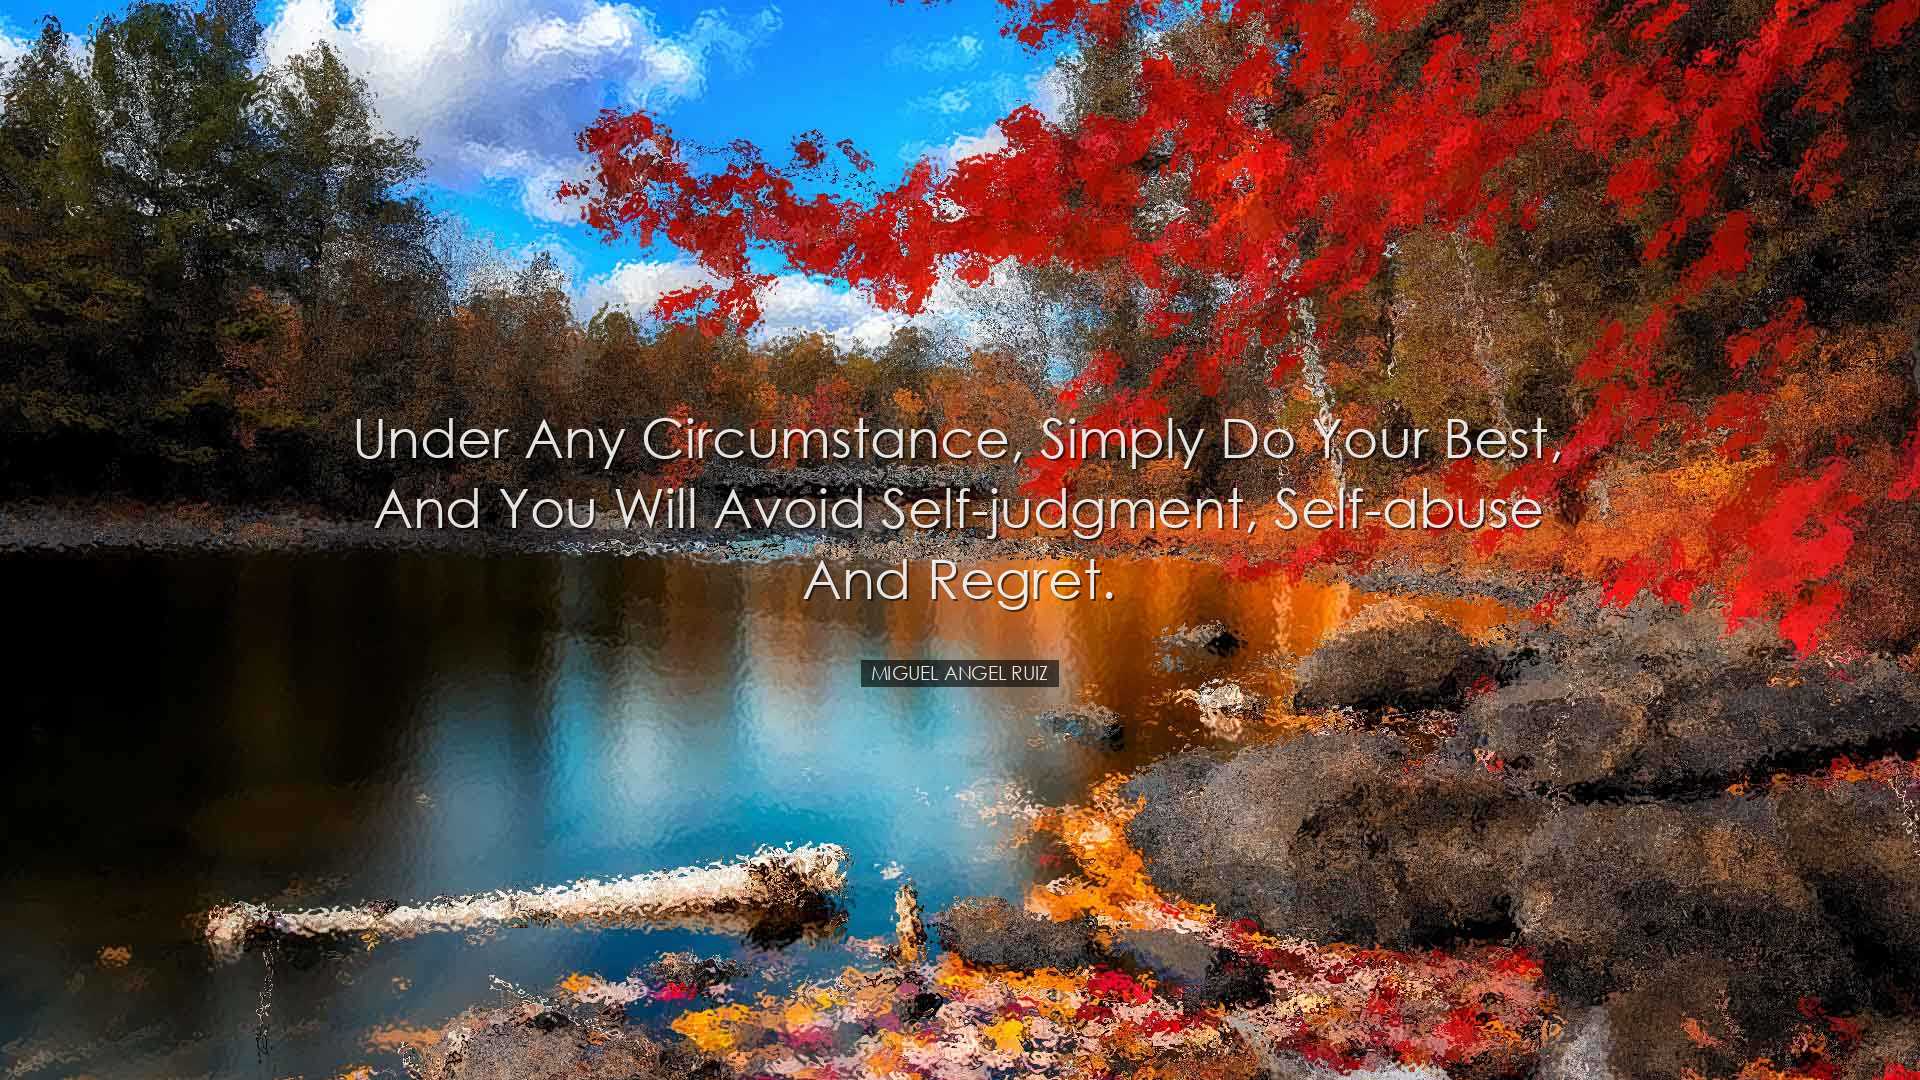 Under any circumstance, simply do your best, and you will avoid se